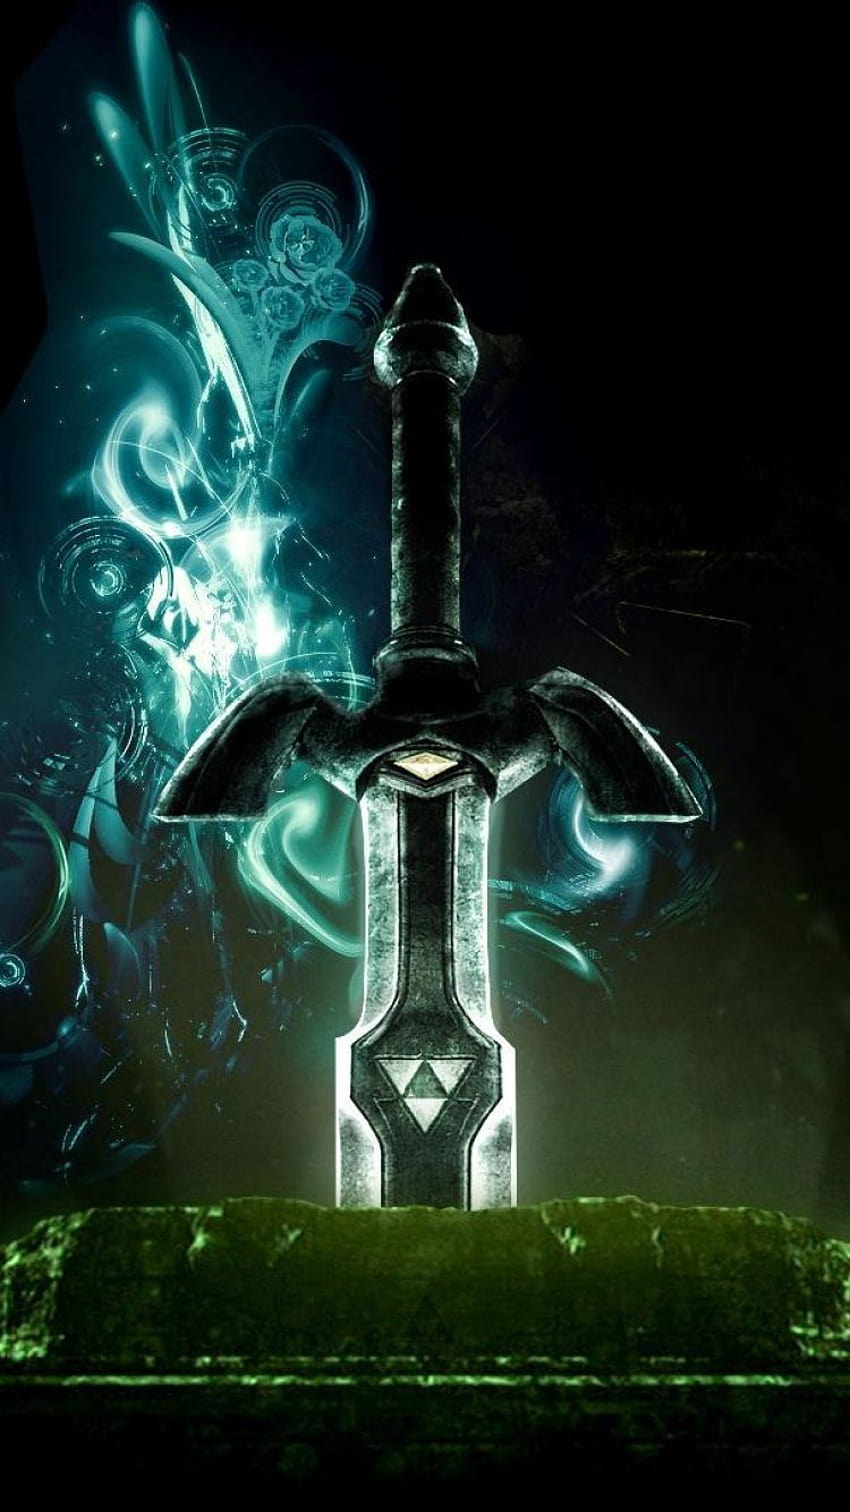 The Legend of Zelda Wallpapers for iPhone | iTito Games Blog